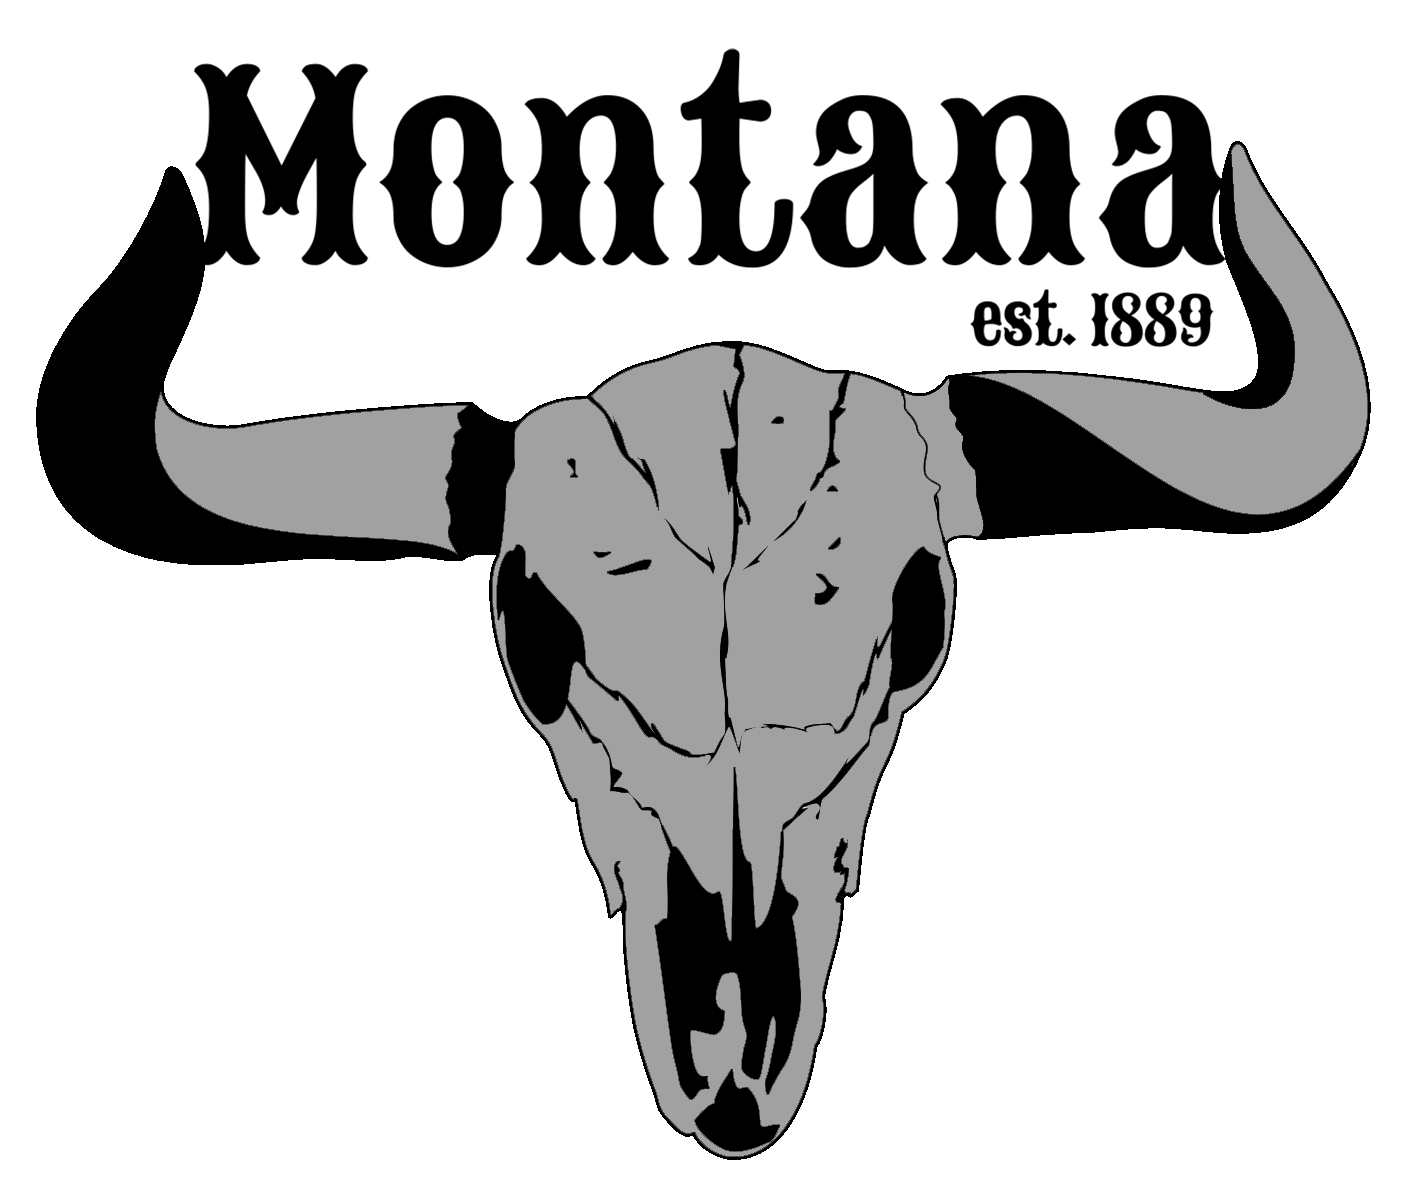 A sticker featuring a silhouette of a Montana steer against a scenic backdrop, ideal for expressing love for the Treasure State.